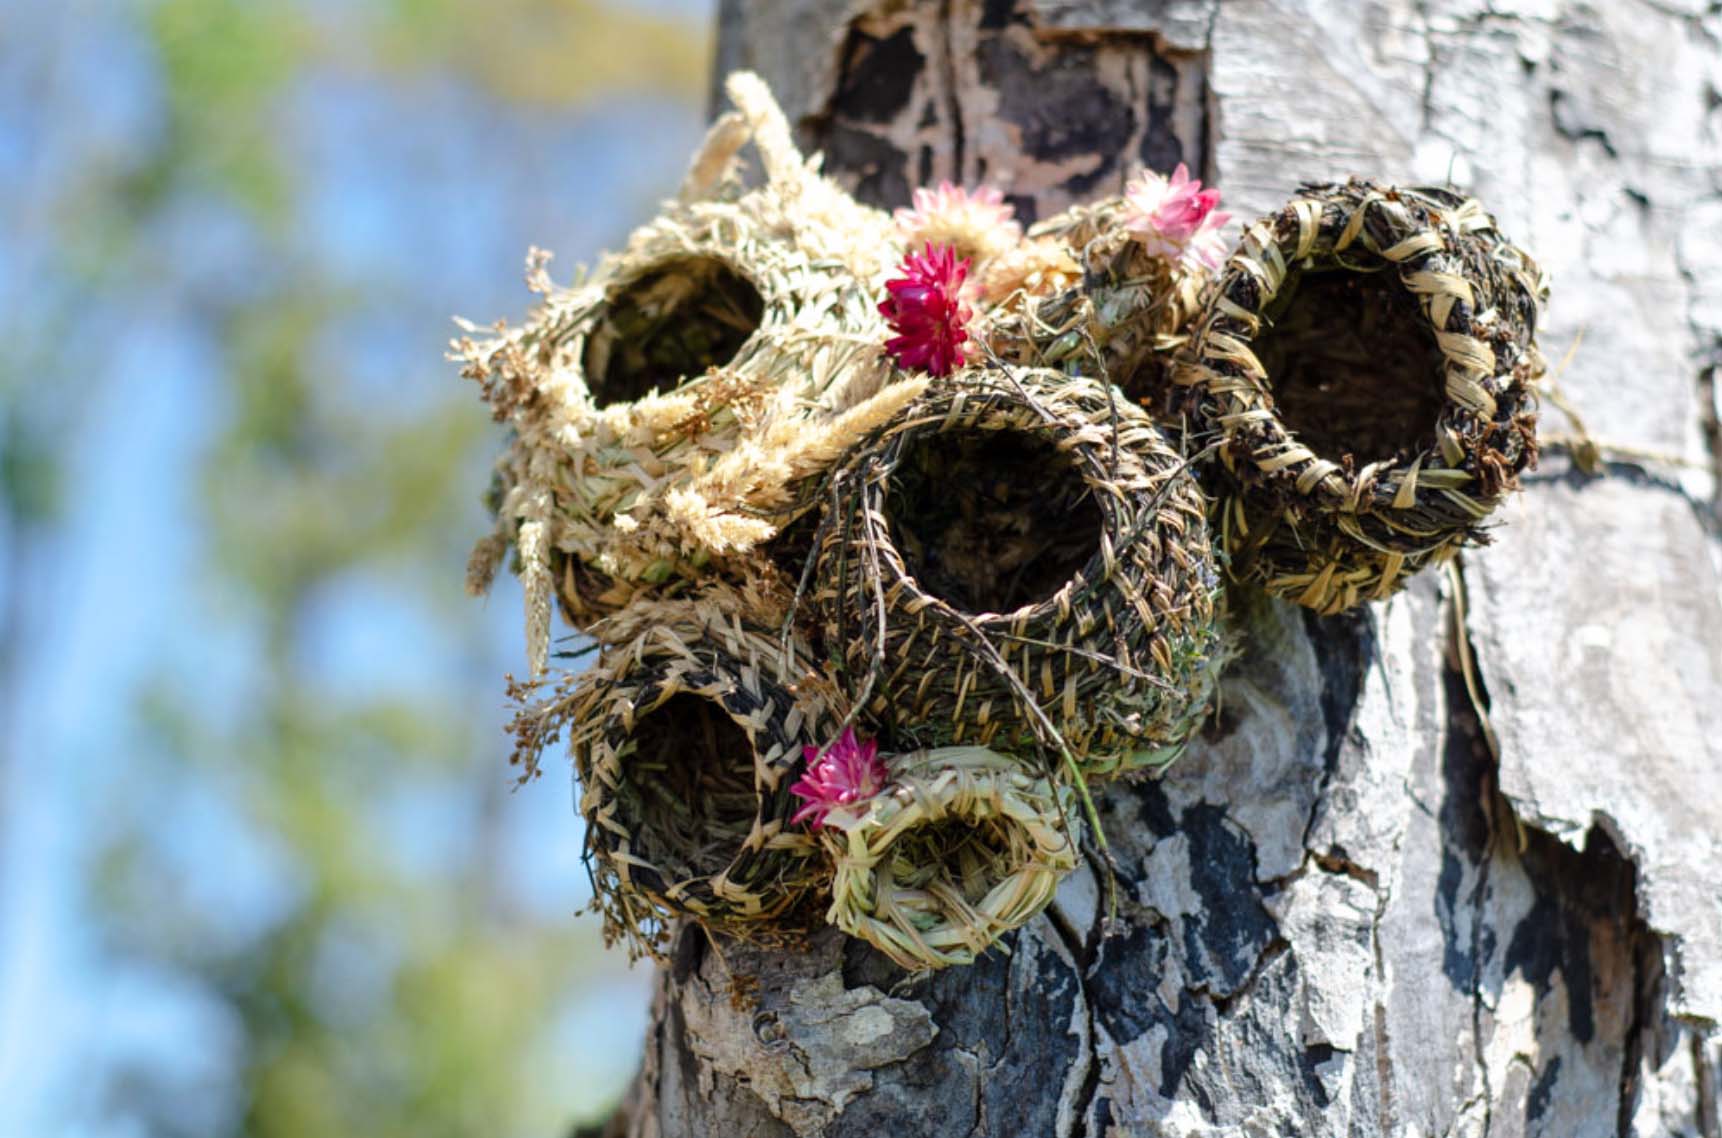 A cluster of woven baskets attached to a tree trunk